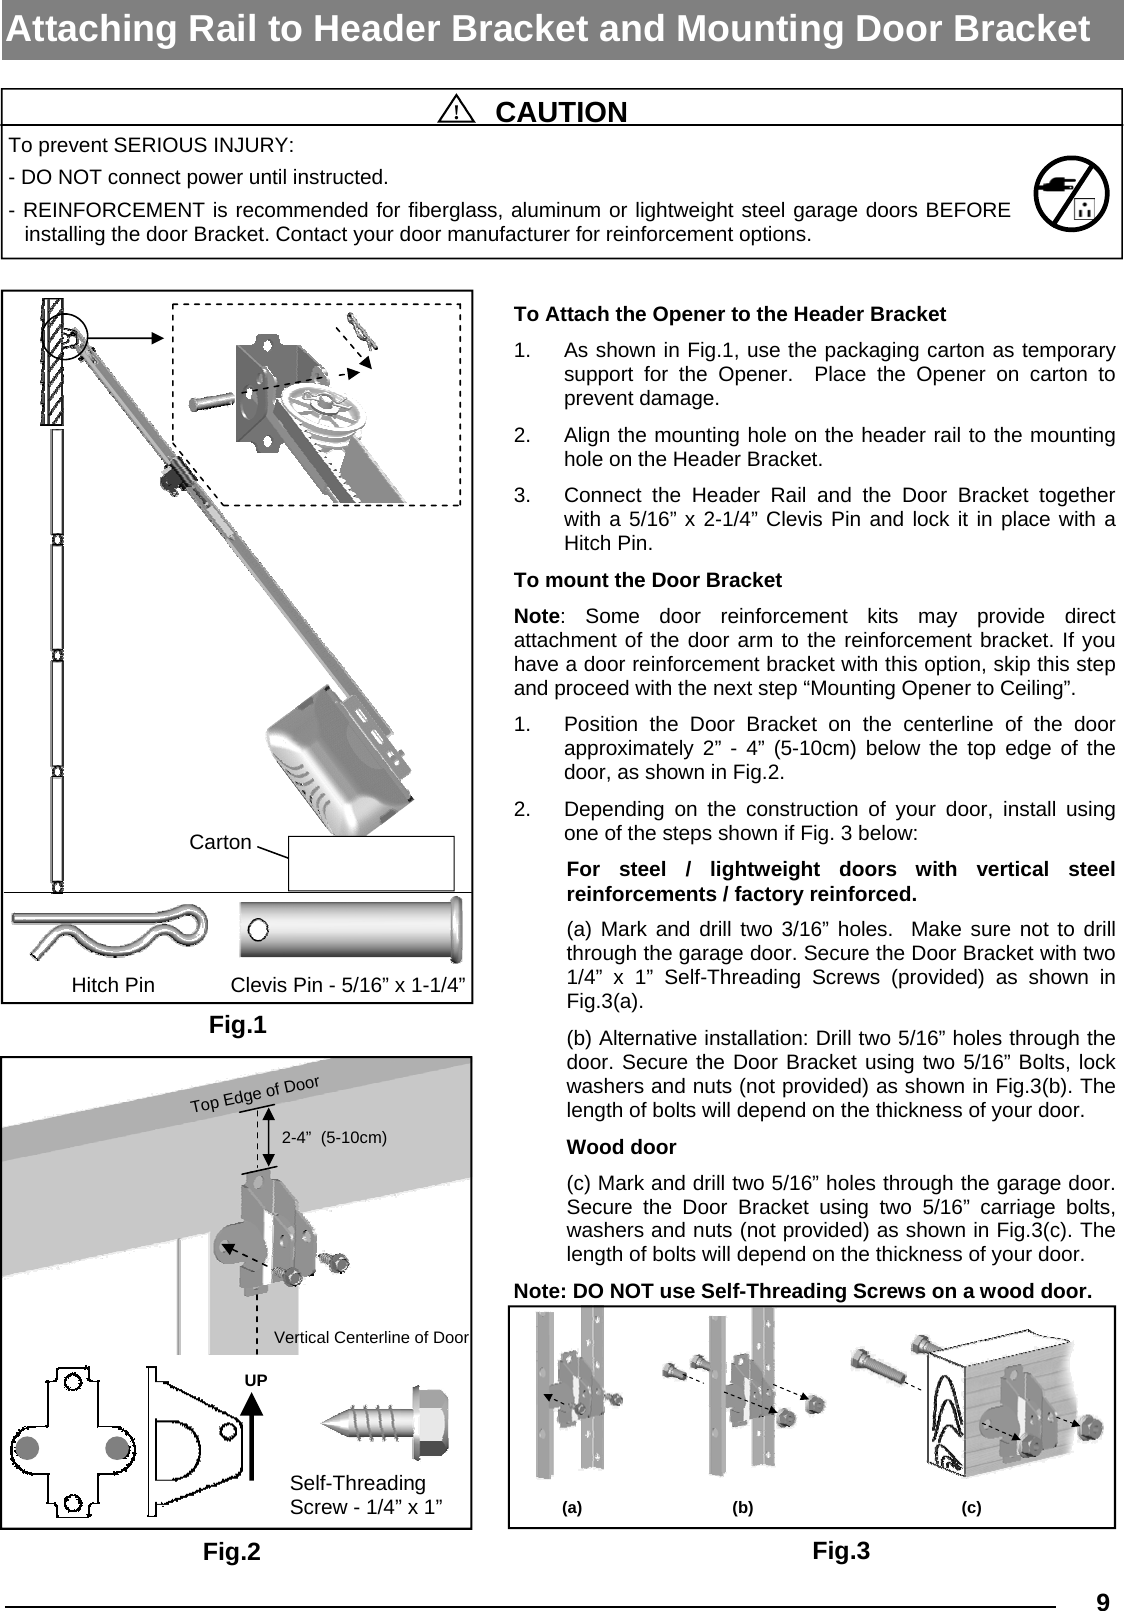   9  !  CAUTION To prevent SERIOUS INJURY: - DO NOT connect power until instructed. - REINFORCEMENT is recommended for fiberglass, aluminum or lightweight steel garage doors BEFORE   installing the door Bracket. Contact your door manufacturer for reinforcement options. Attaching Rail to Header Bracket and Mounting Door Bracket Fig.1 Fig.3 Carton Clevis Pin - 5/16” x 1-1/4” Hitch Pin (a) (b)  (c) To Attach the Opener to the Header Bracket 1.  As shown in Fig.1, use the packaging carton as temporary support for the Opener.  Place the Opener on carton to   prevent damage.  2.  Align the mounting hole on the header rail to the mounting hole on the Header Bracket. 3.  Connect the Header Rail and the Door Bracket together with a 5/16” x 2-1/4” Clevis Pin and lock it in place with a Hitch Pin. To mount the Door Bracket Note:  Some  door  reinforcement  kits  may  provide  direct           attachment of the door arm to the reinforcement bracket. If you have a door reinforcement bracket with this option, skip this step and proceed with the next step “Mounting Opener to Ceiling”. 1.  Position the Door Bracket on the centerline of the door    approximately 2” - 4” (5-10cm) below the top edge of the door, as shown in Fig.2. 2.  Depending on the construction of your door, install using one of the steps shown if Fig. 3 below: For  steel  /  lightweight  doors  with  vertical  steel            reinforcements / factory reinforced. (a) Mark and drill two 3/16” holes.  Make sure not to drill through the garage door. Secure the Door Bracket with two 1/4” x 1” Self-Threading Screws (provided) as shown in Fig.3(a). (b) Alternative installation: Drill two 5/16” holes through the door. Secure the Door Bracket using two 5/16” Bolts, lock washers and nuts (not provided) as shown in Fig.3(b). The length of bolts will depend on the thickness of your door. Wood door (c) Mark and drill two 5/16” holes through the garage door.  Secure the Door Bracket using two 5/16” carriage bolts, washers and nuts (not provided) as shown in Fig.3(c). The length of bolts will depend on the thickness of your door. Note: DO NOT use Self-Threading Screws on a wood door. Fig.2 Self-Threading Screw - 1/4” x 1”  UP Vertical Centerline of Door 2-4”  (5-10cm) Top Edge of Door 